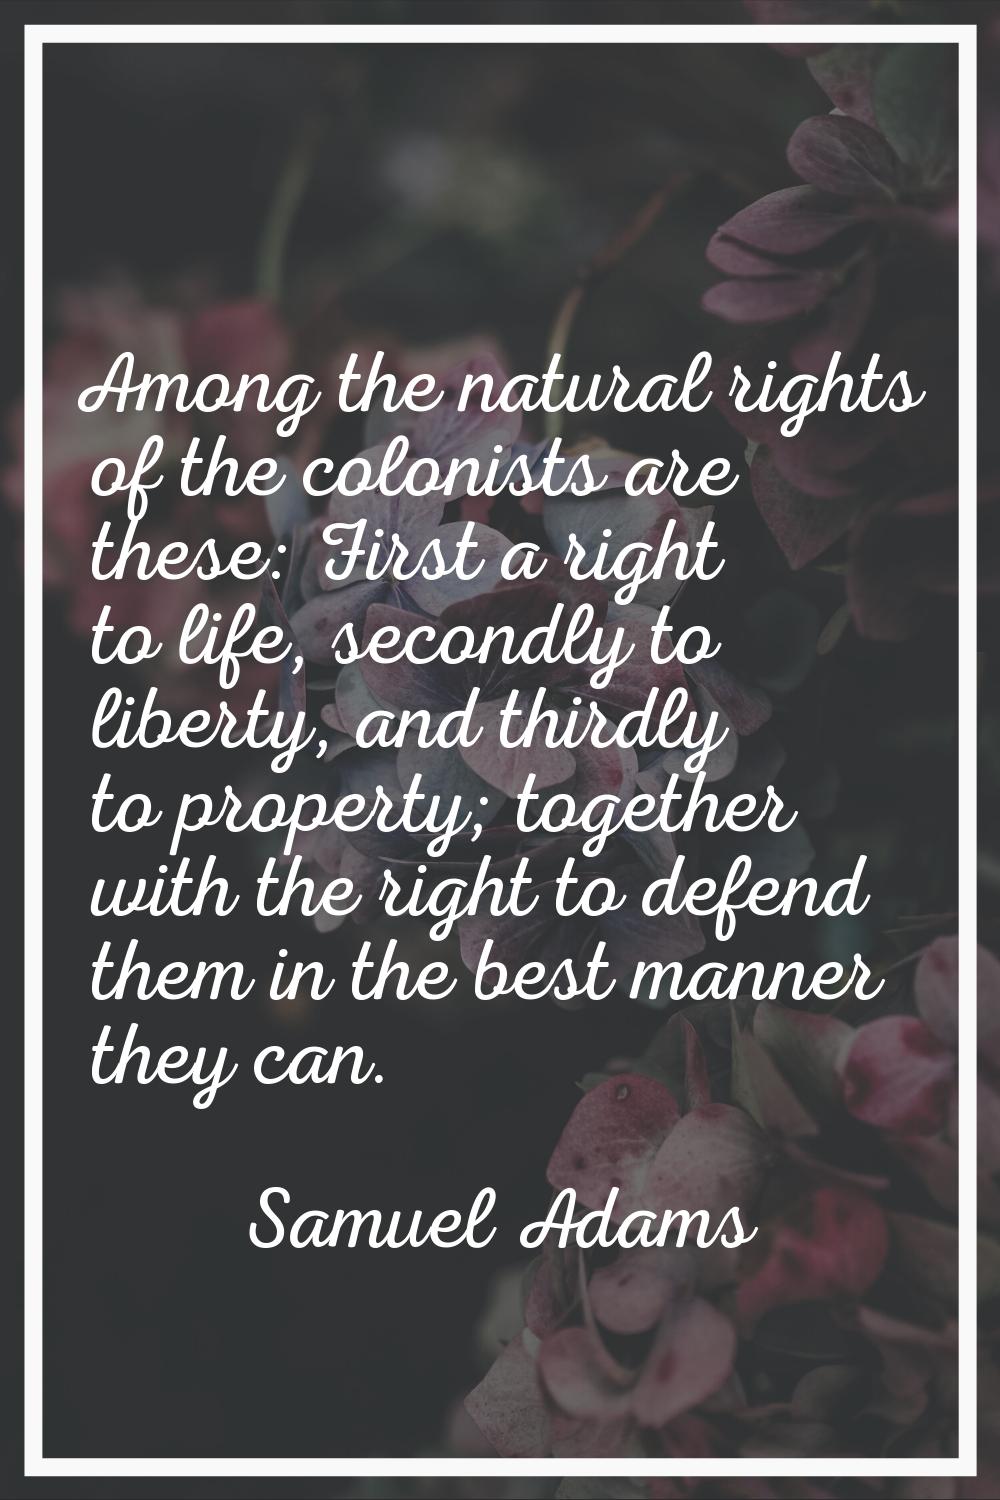 Among the natural rights of the colonists are these: First a right to life, secondly to liberty, an